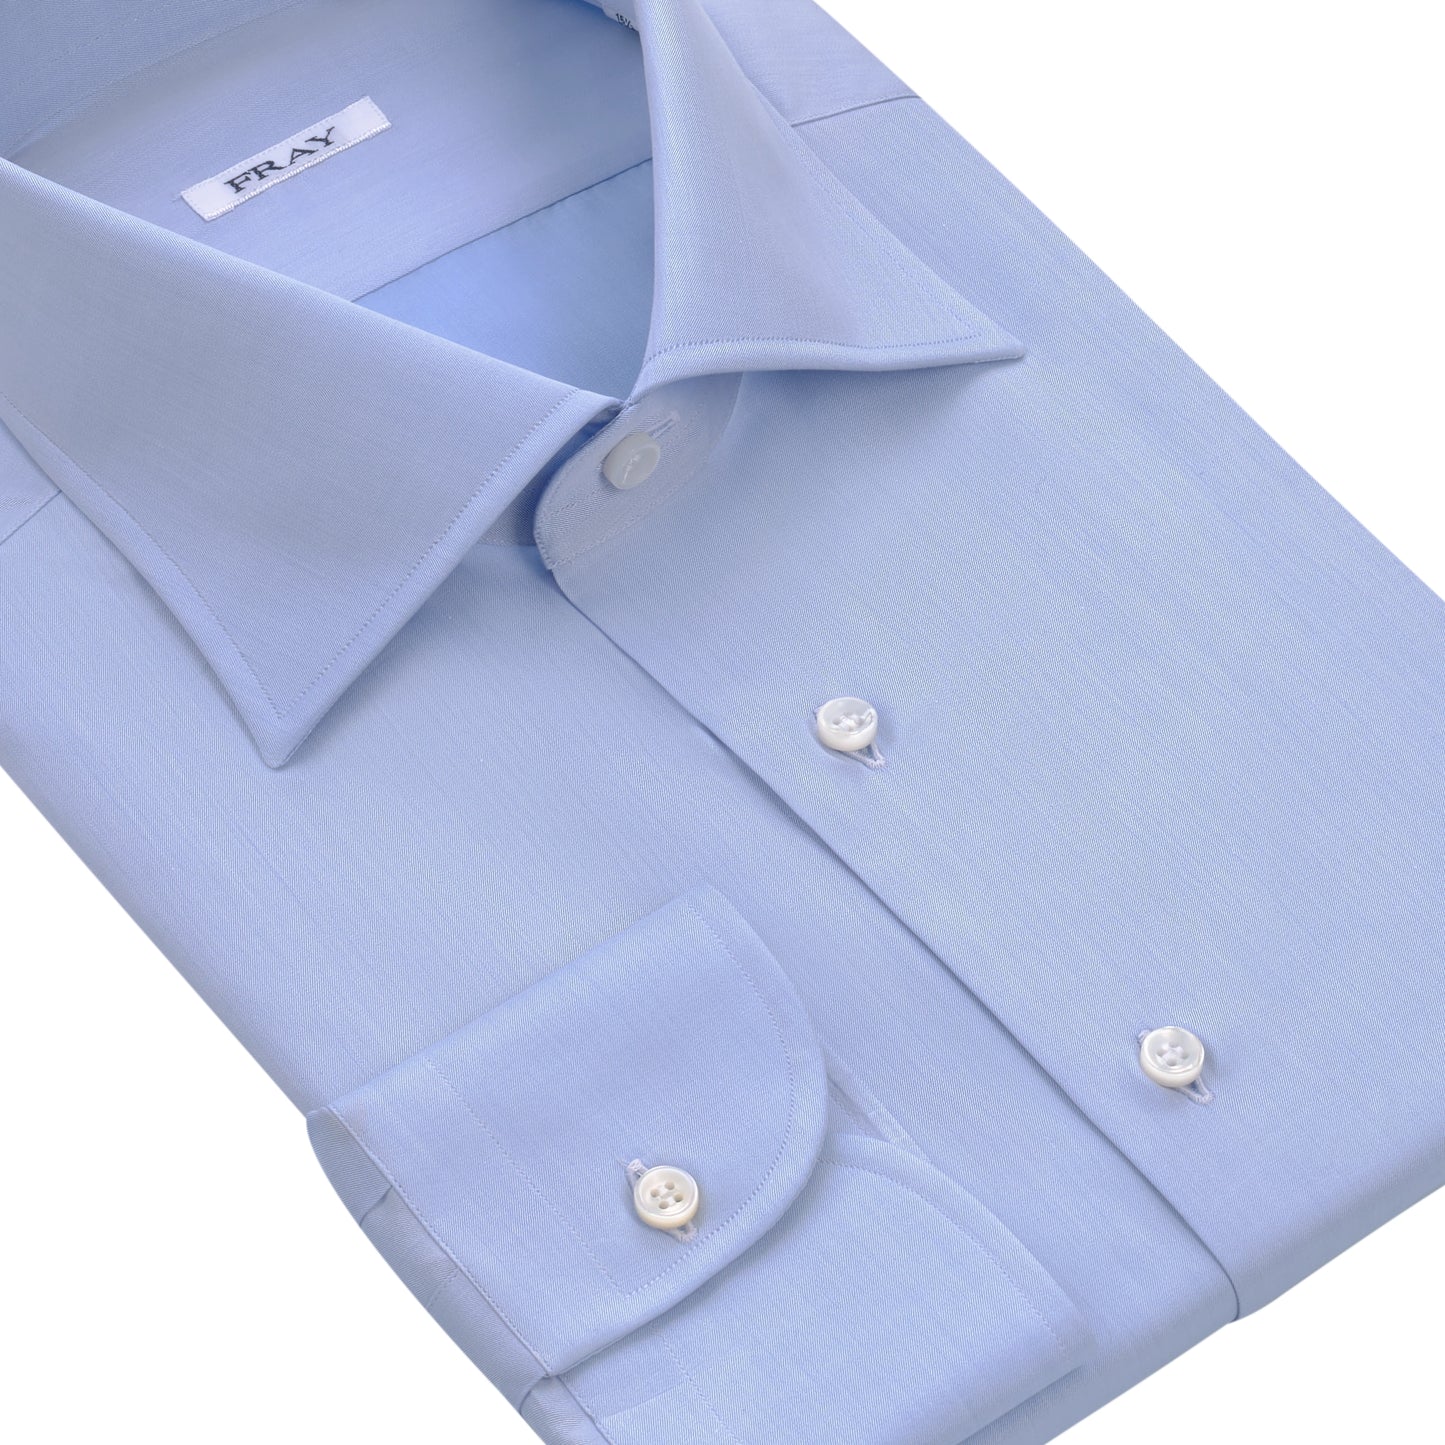 Classic Cotton Shirt in Light Blue with Spread Collar